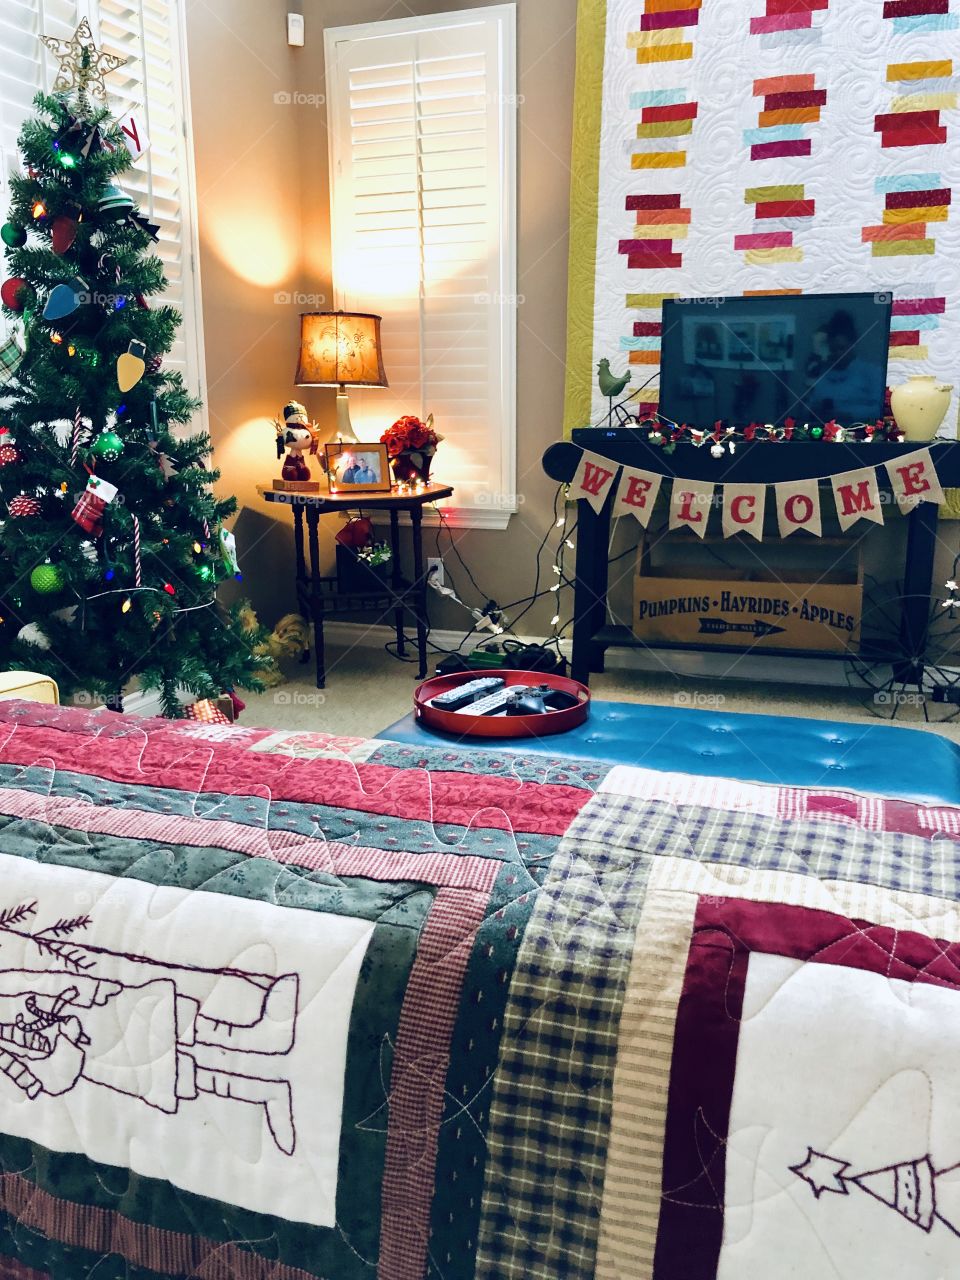 Christmas and quilts!